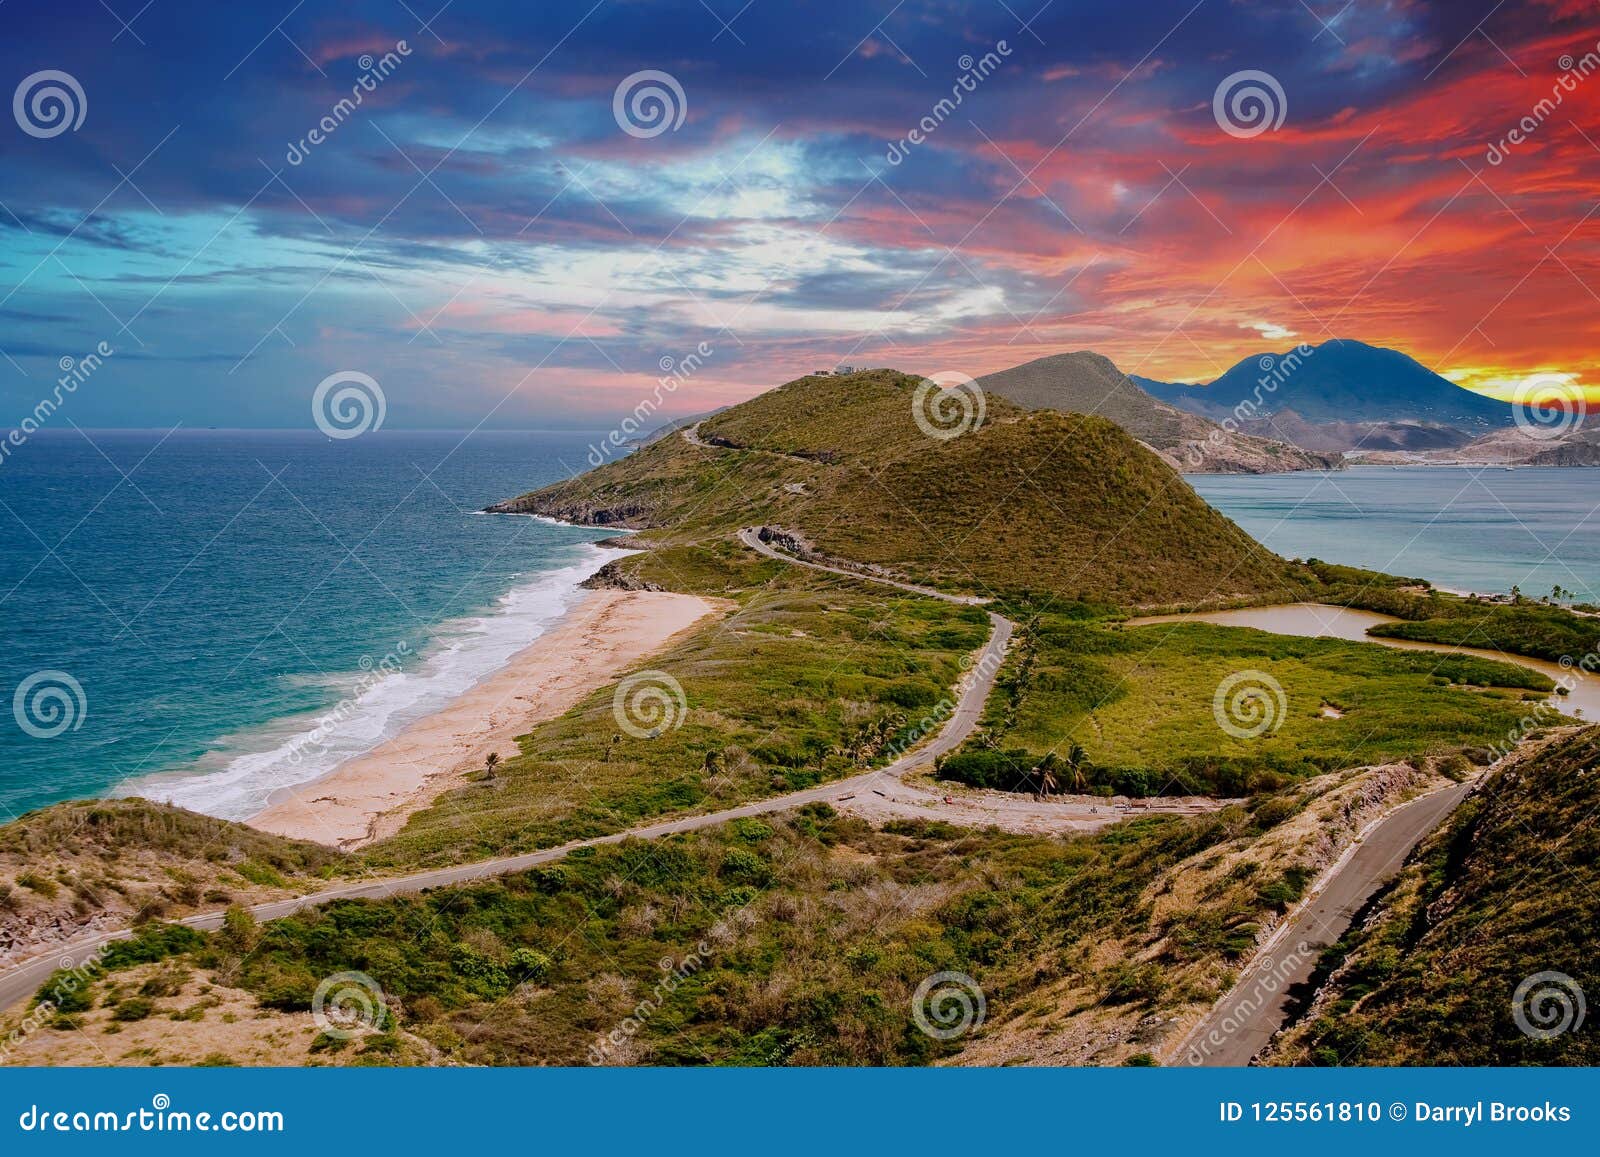 point of land in st kitts